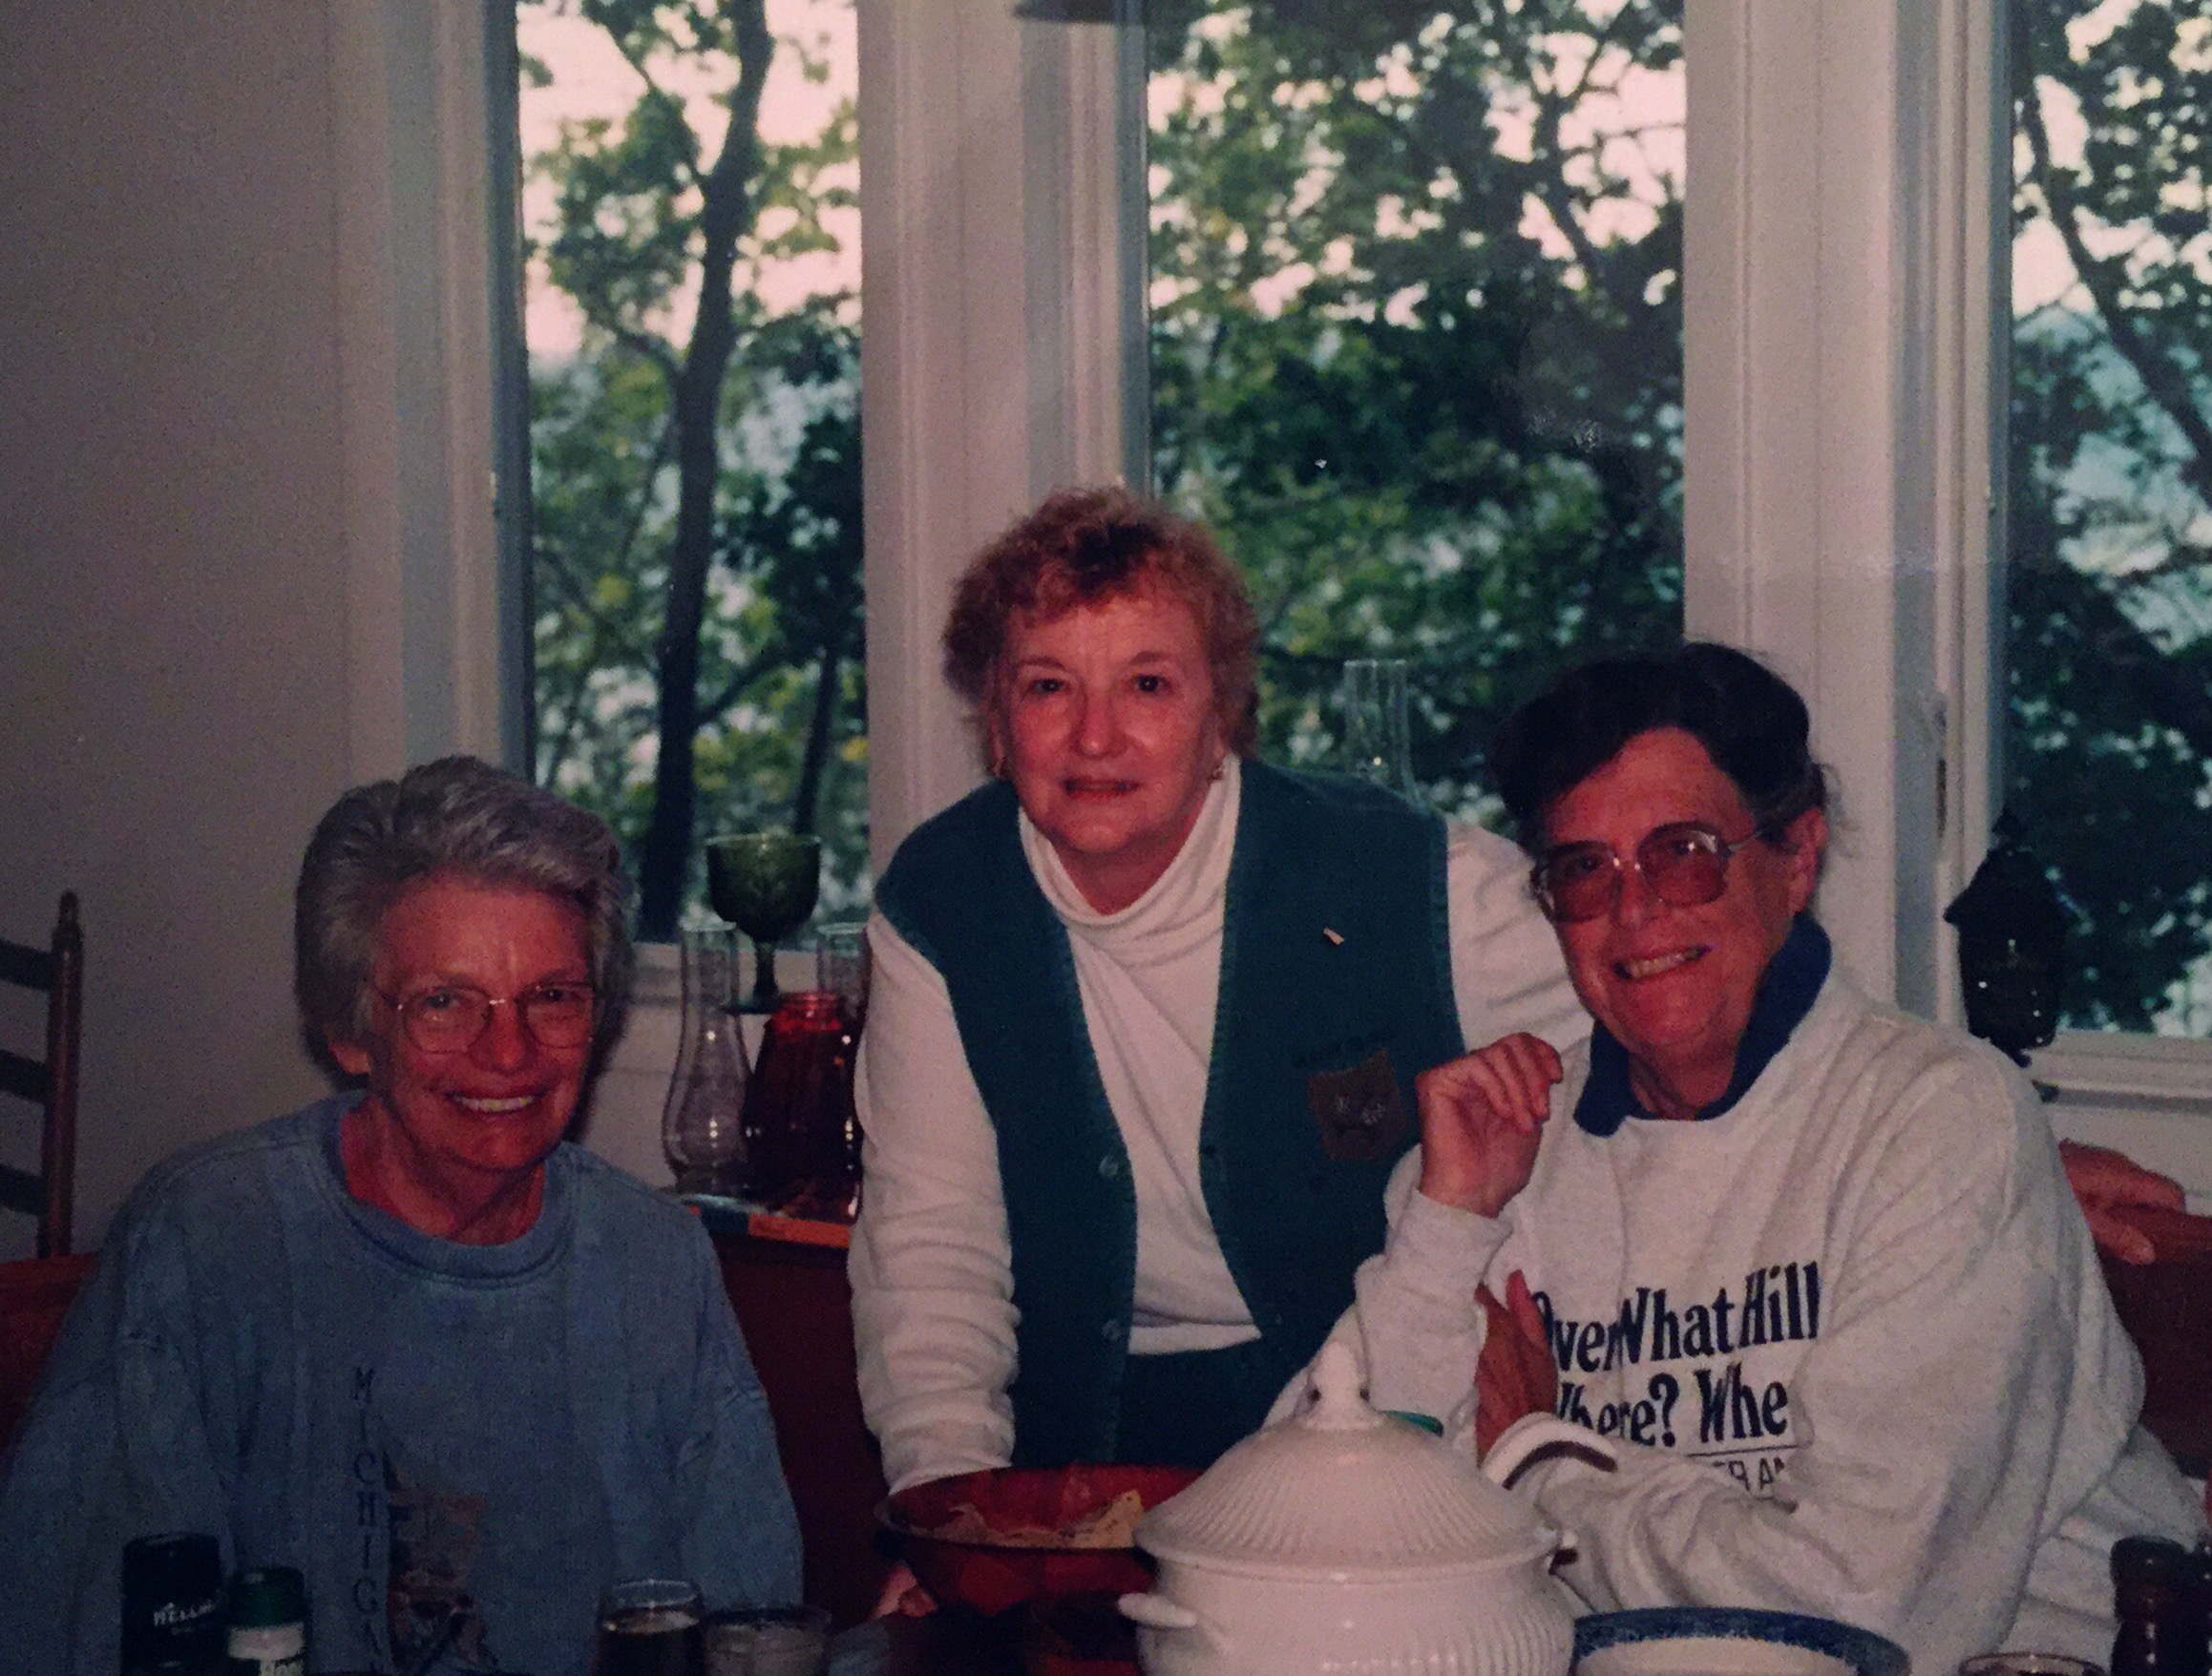 Lucy Denney and me with Ann Broder in 1998 at Broder's summer home on Beaver Island.  Tomorrow we will celebrate Ann's remarkable life.